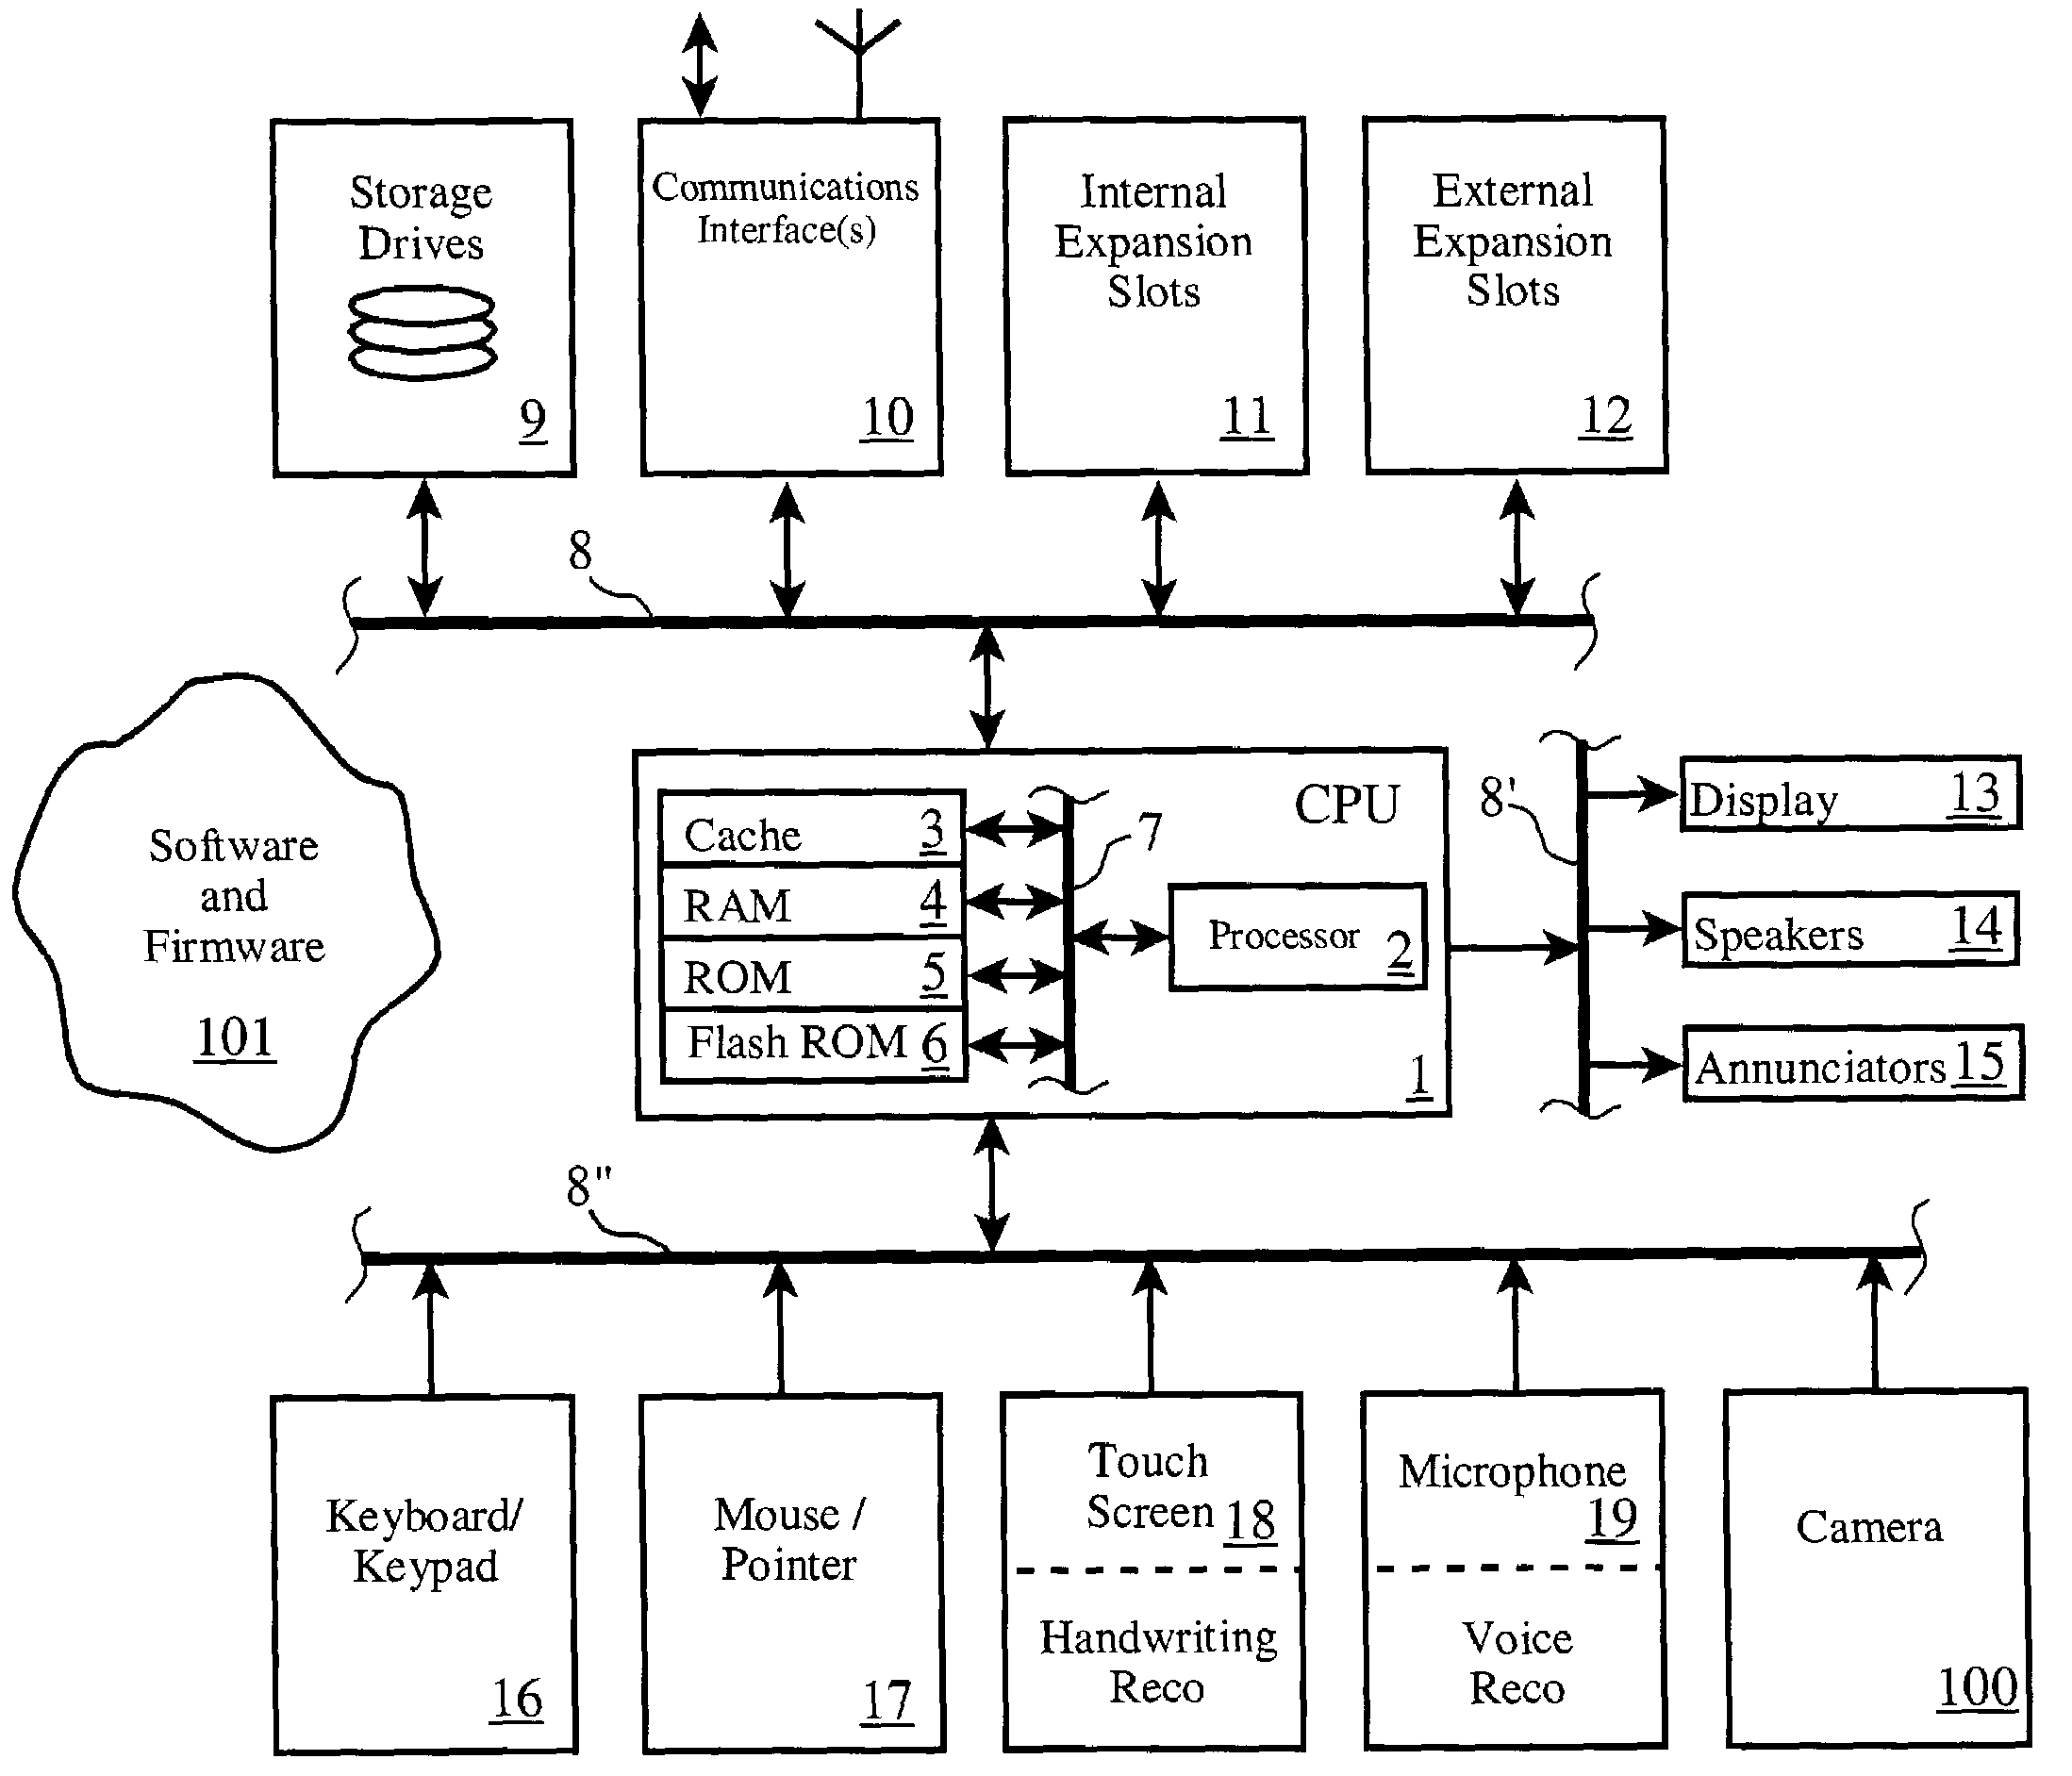 Security system for replicated storage devices on computer networks